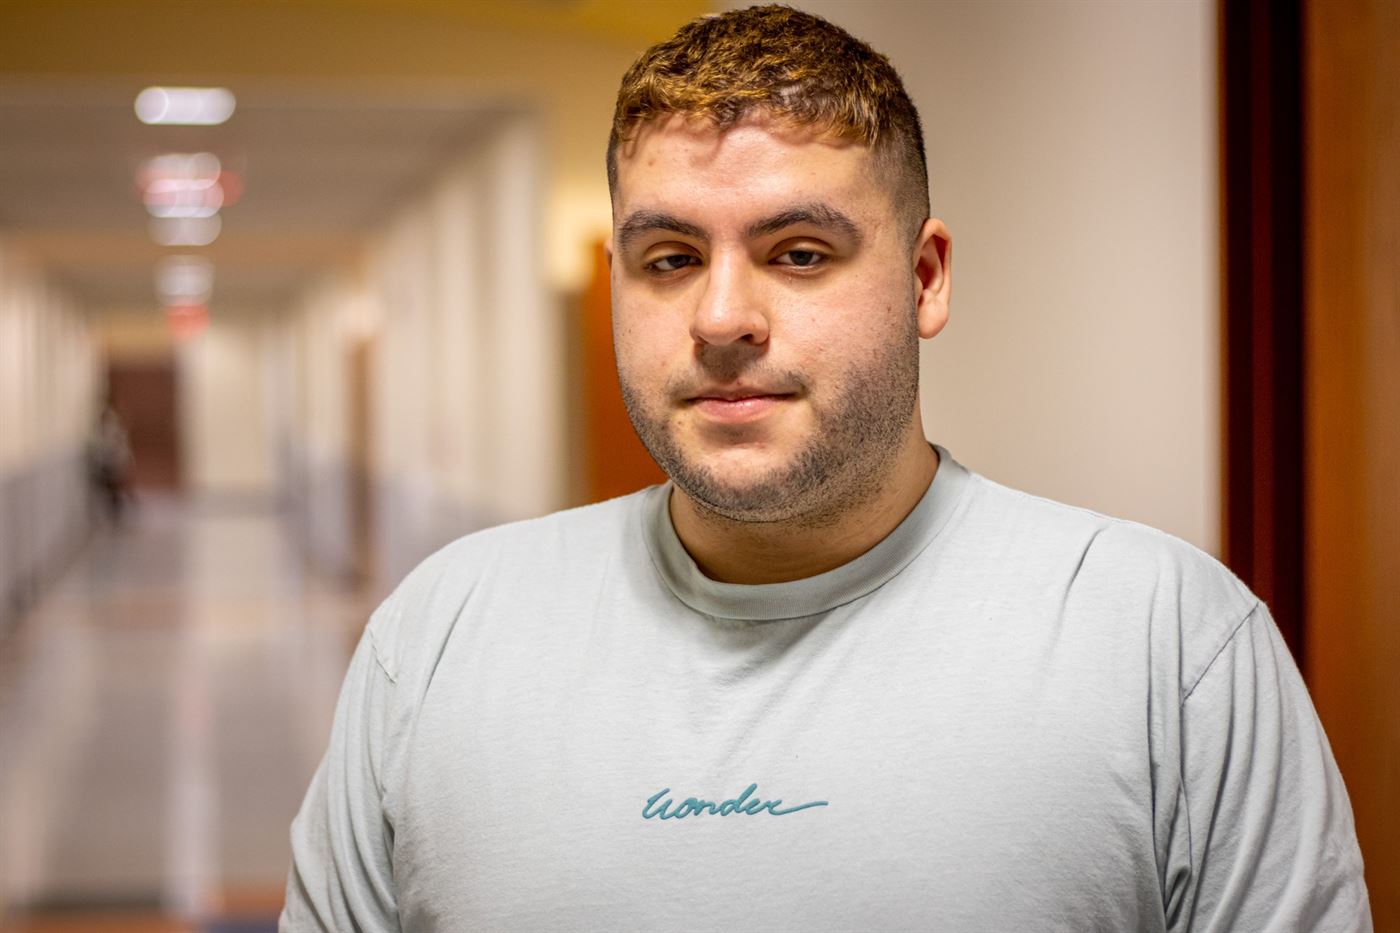 Jon Serrano, a junior political science major, who was sexually harassed by one of his friends after a study group meeting. John LaRosa | The Montclarion